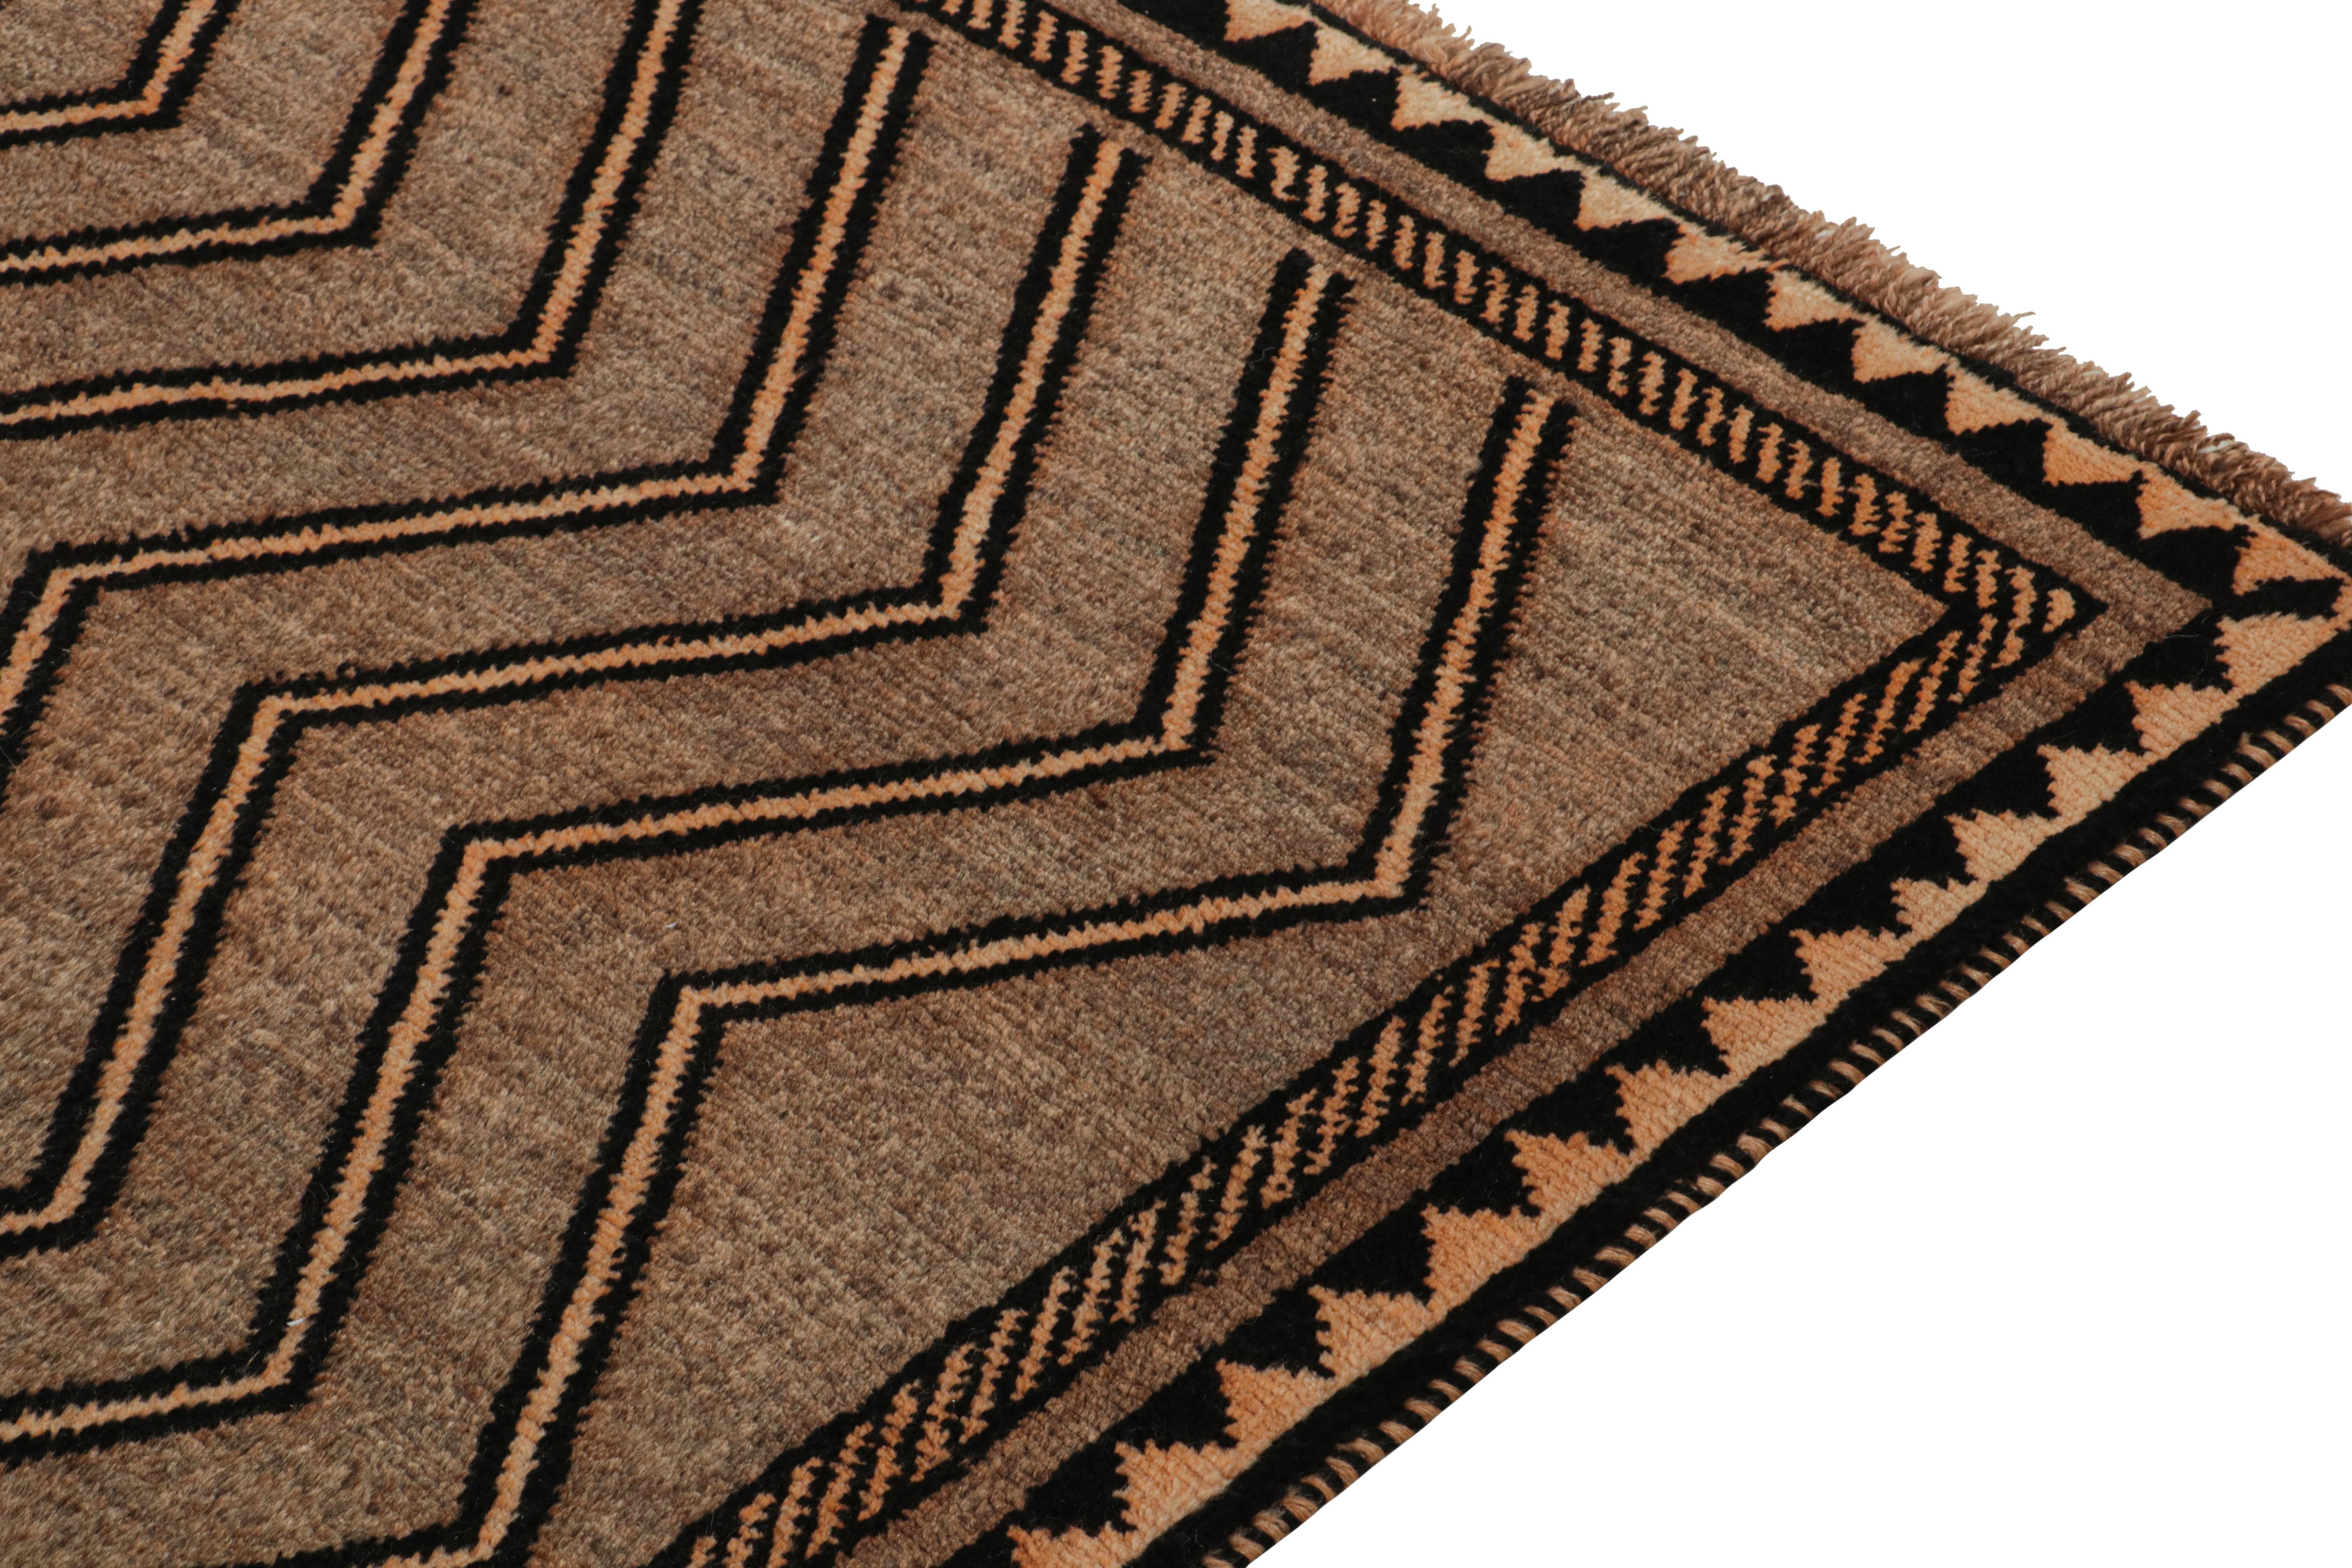 Vintage Gabbeh Tribal Rug in Beige-Brown & Black Chevron Patterns by Rug Kilim In Good Condition For Sale In Long Island City, NY